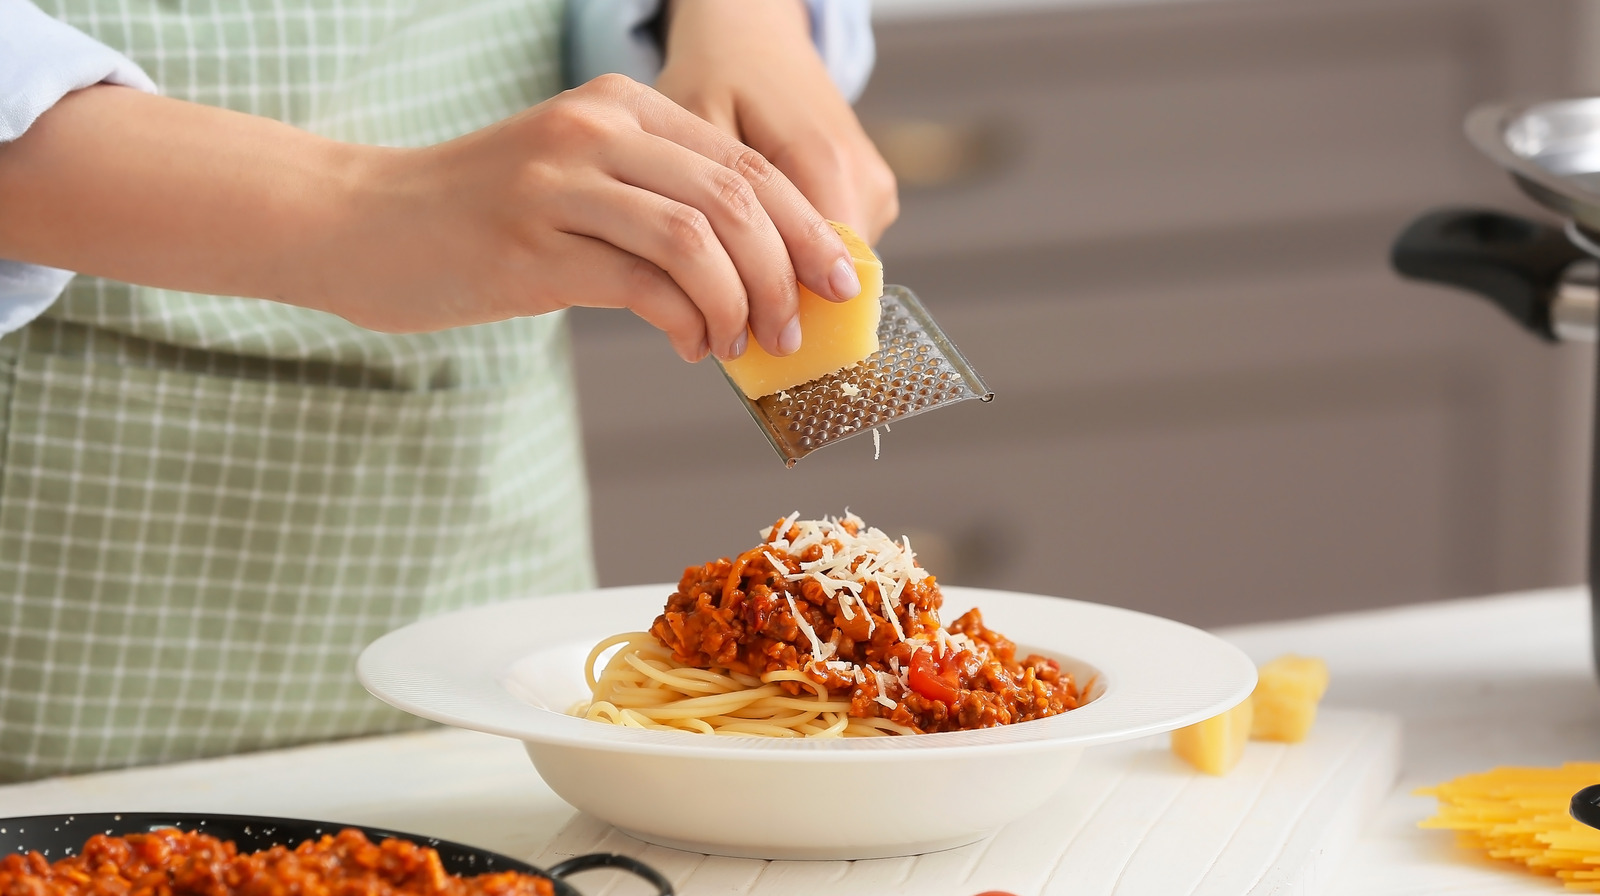 https://www.thedailymeal.com/img/gallery/the-way-you-cut-your-cheese-is-vital-to-preventing-clumps-in-your-pasta/l-intro-1687496280.jpg